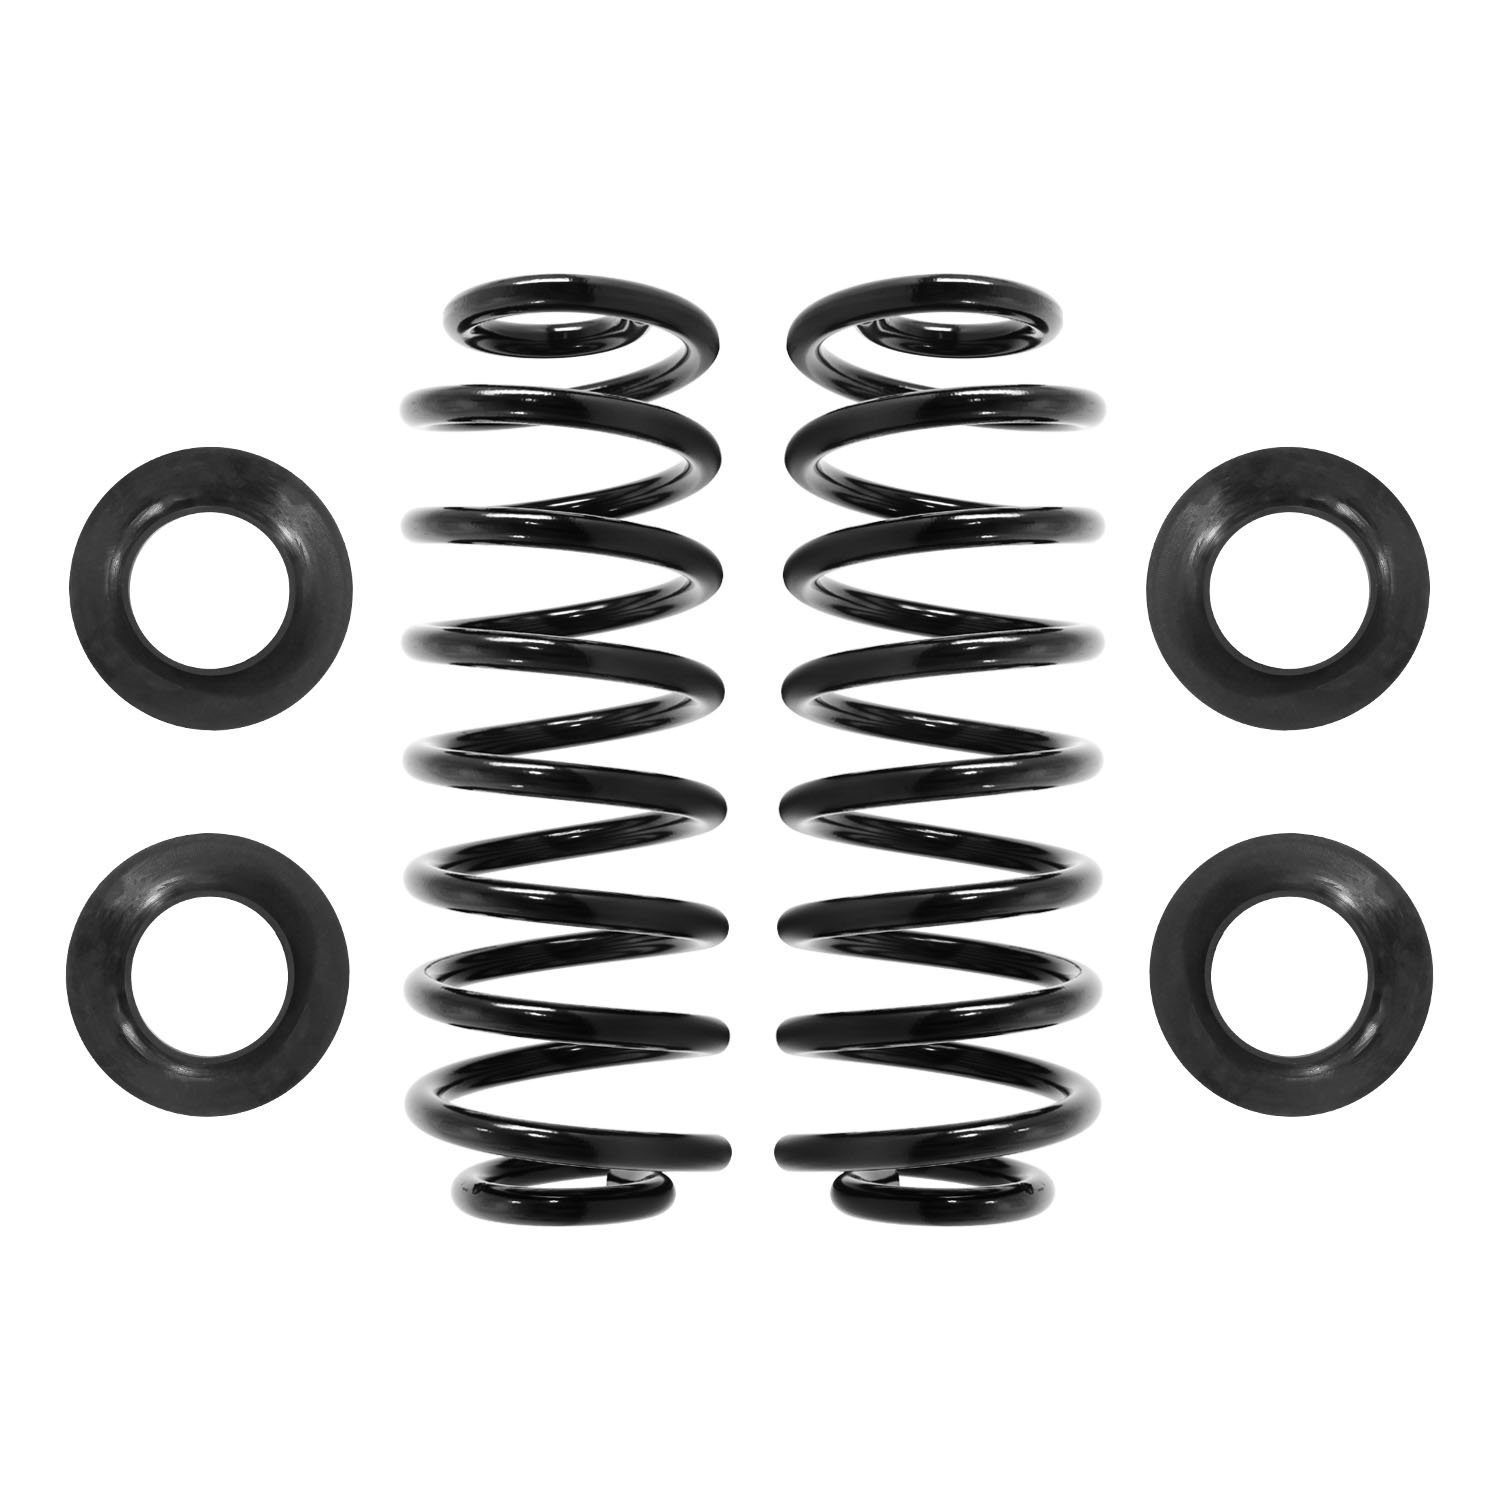 30-515100-KIT Air Spring To Coil Spring Conversion Kit Fits Select Cadillac Escalade, Chevy Tahoe, GMC Yukon